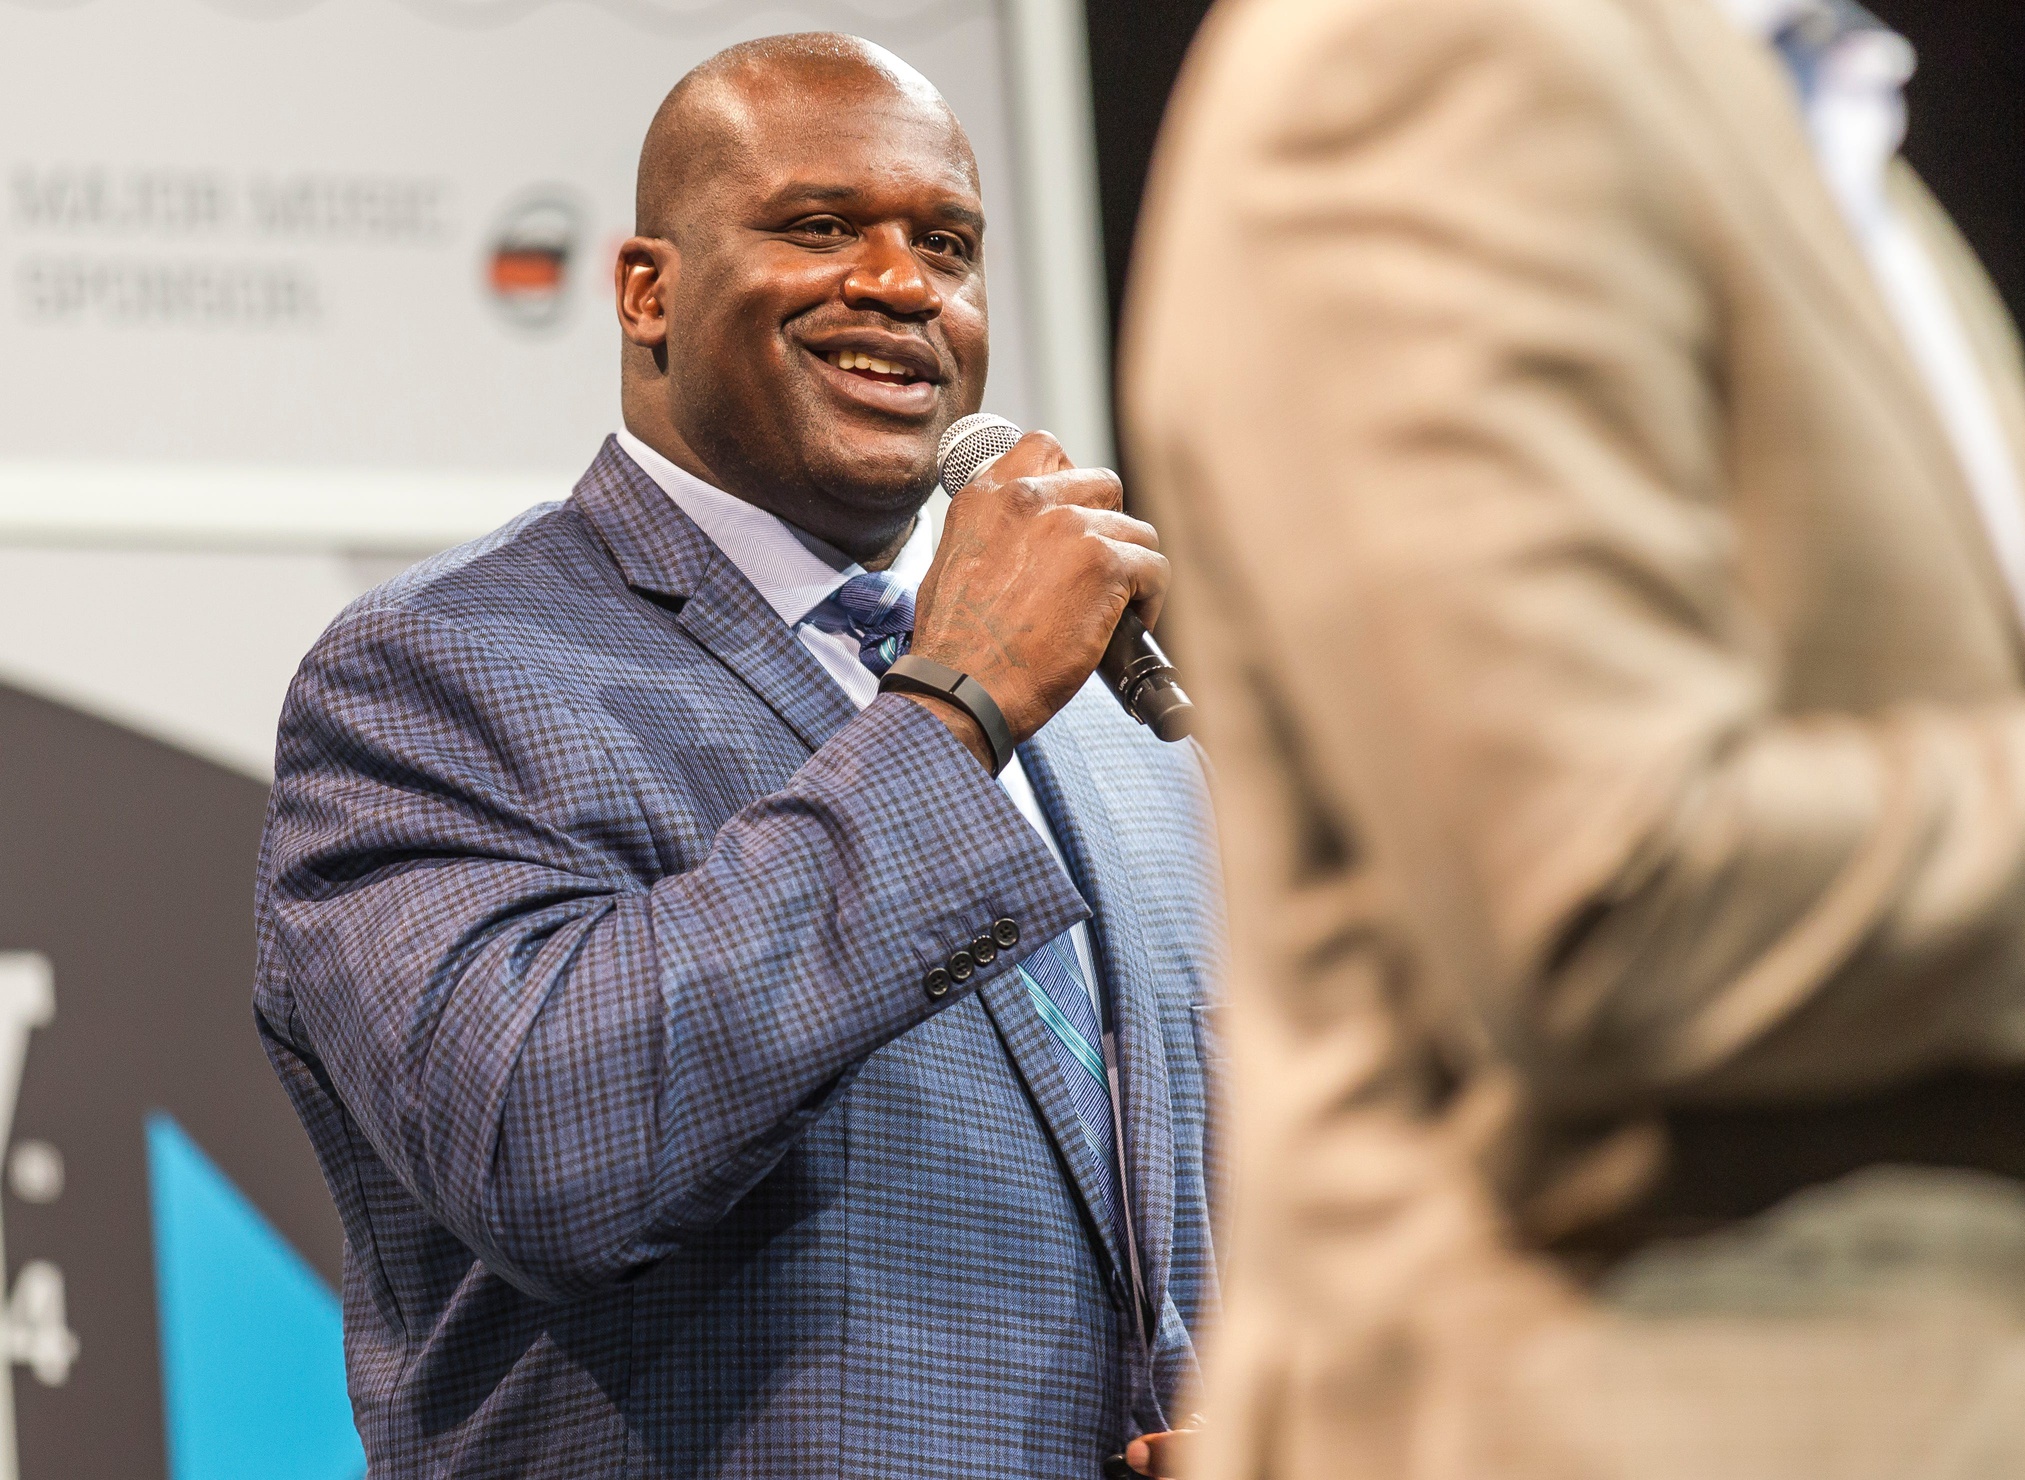 Shaquille O'Neal made bold claims about today's NBA.